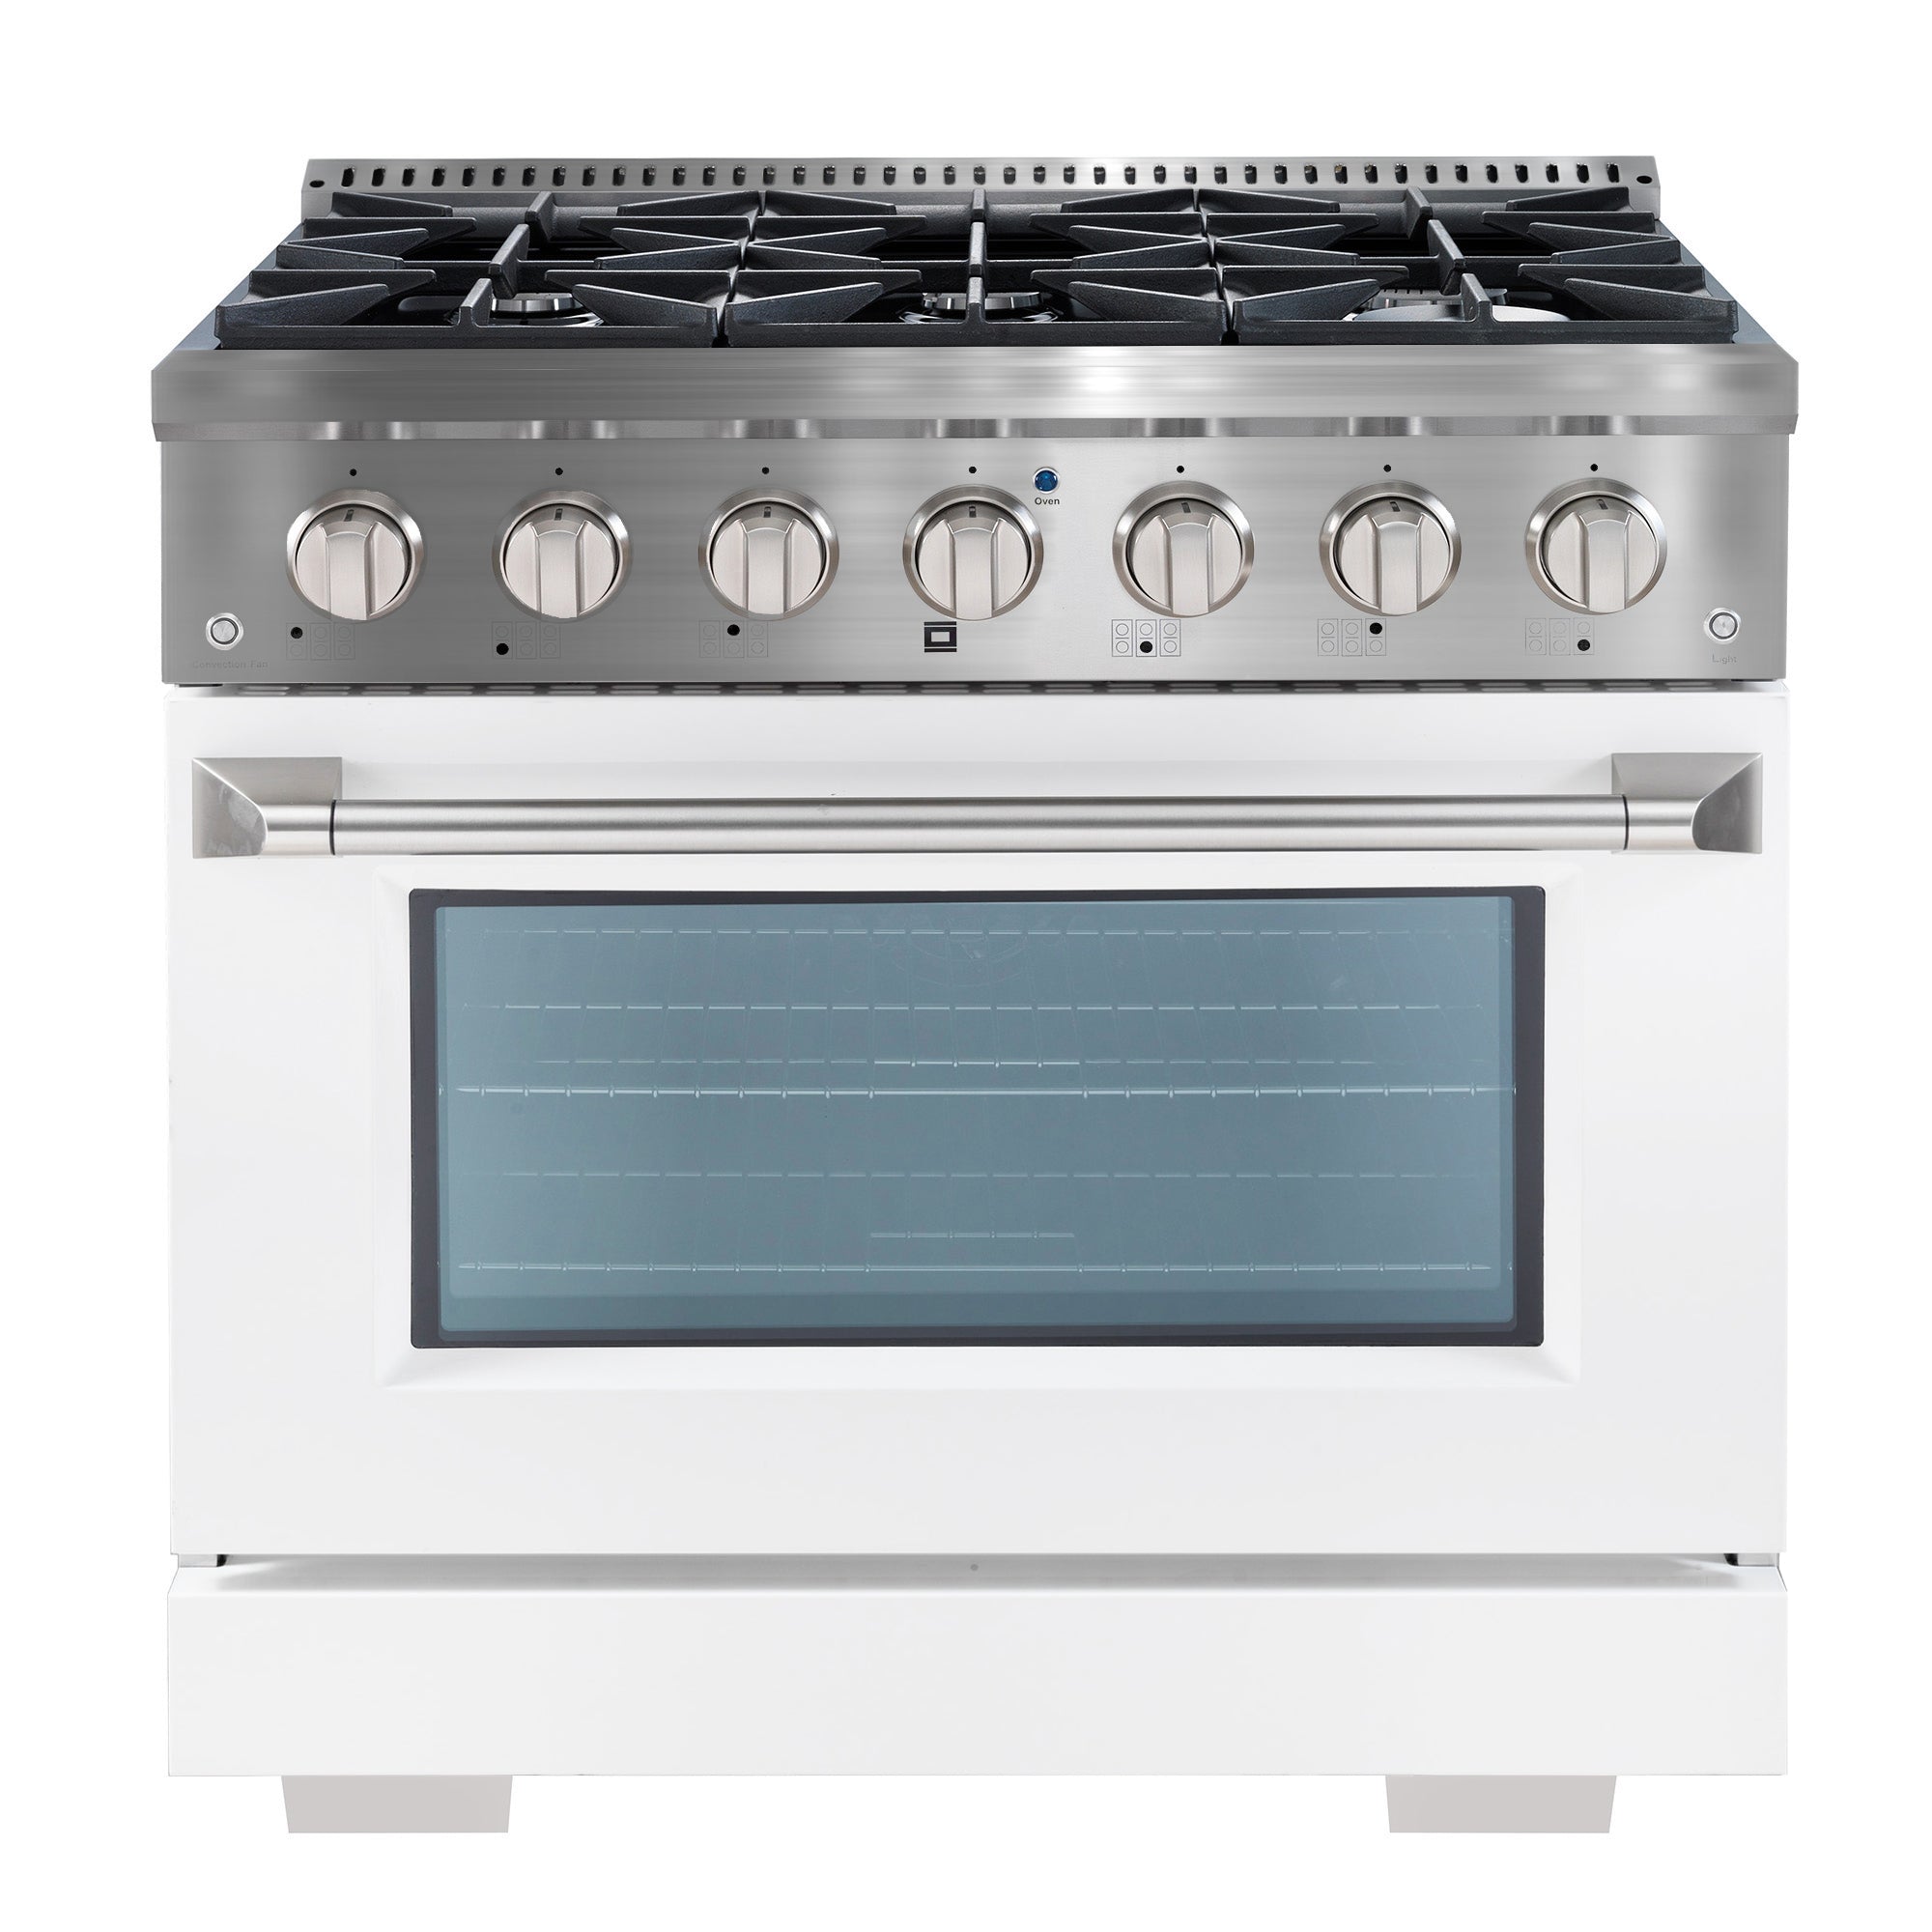 Ancona 36” 5.2 cu. ft. Gas Range with 6 Burners and Convection Oven in Stainless Steel with White Door